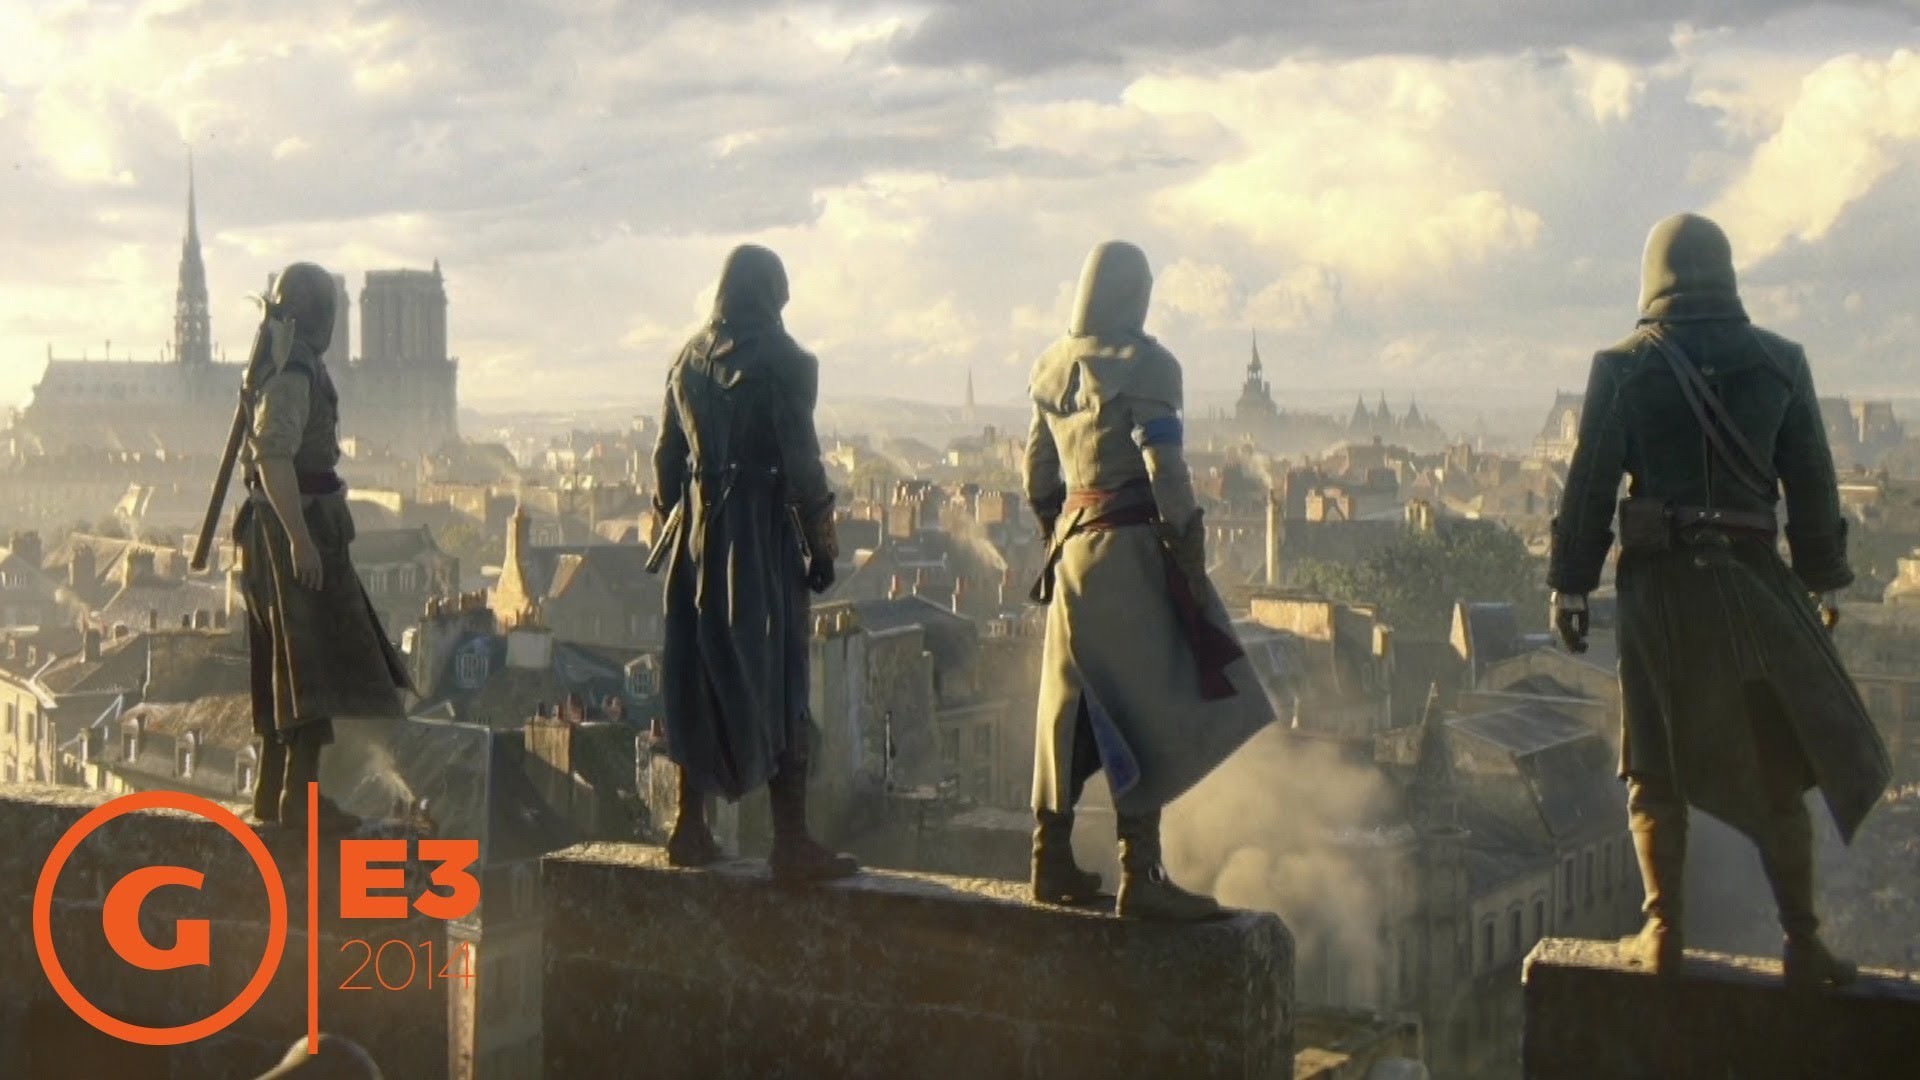 1920x1080 Assassin's Creed Unity - E3 2014 Trailer at Ubisoft Press Conference -  YouTube